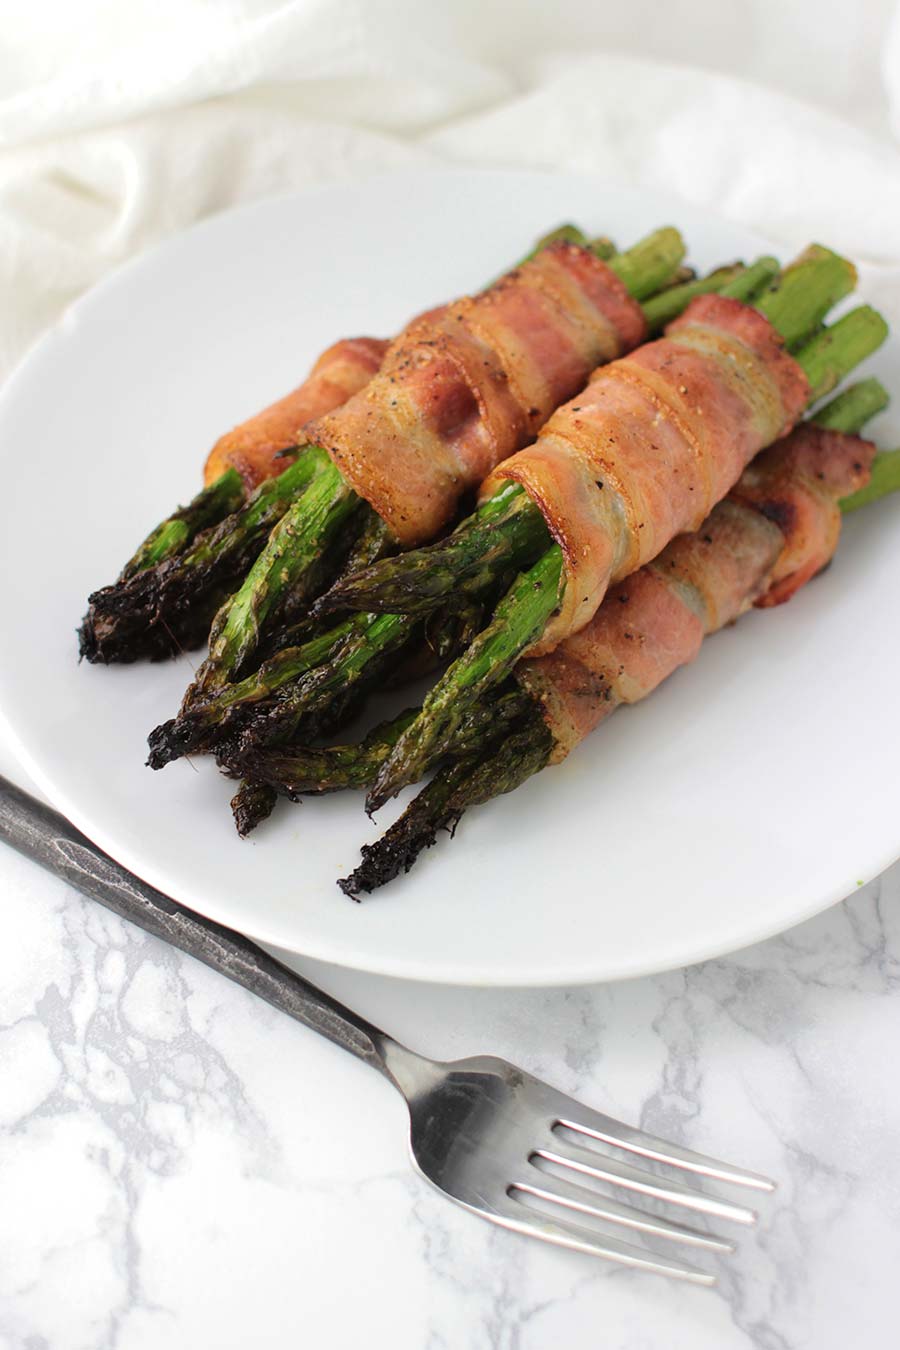 Bacon-Wrapped Asian Asparagus recipe from acleanplate.com #aip #autoimmuneprotocol #paleo